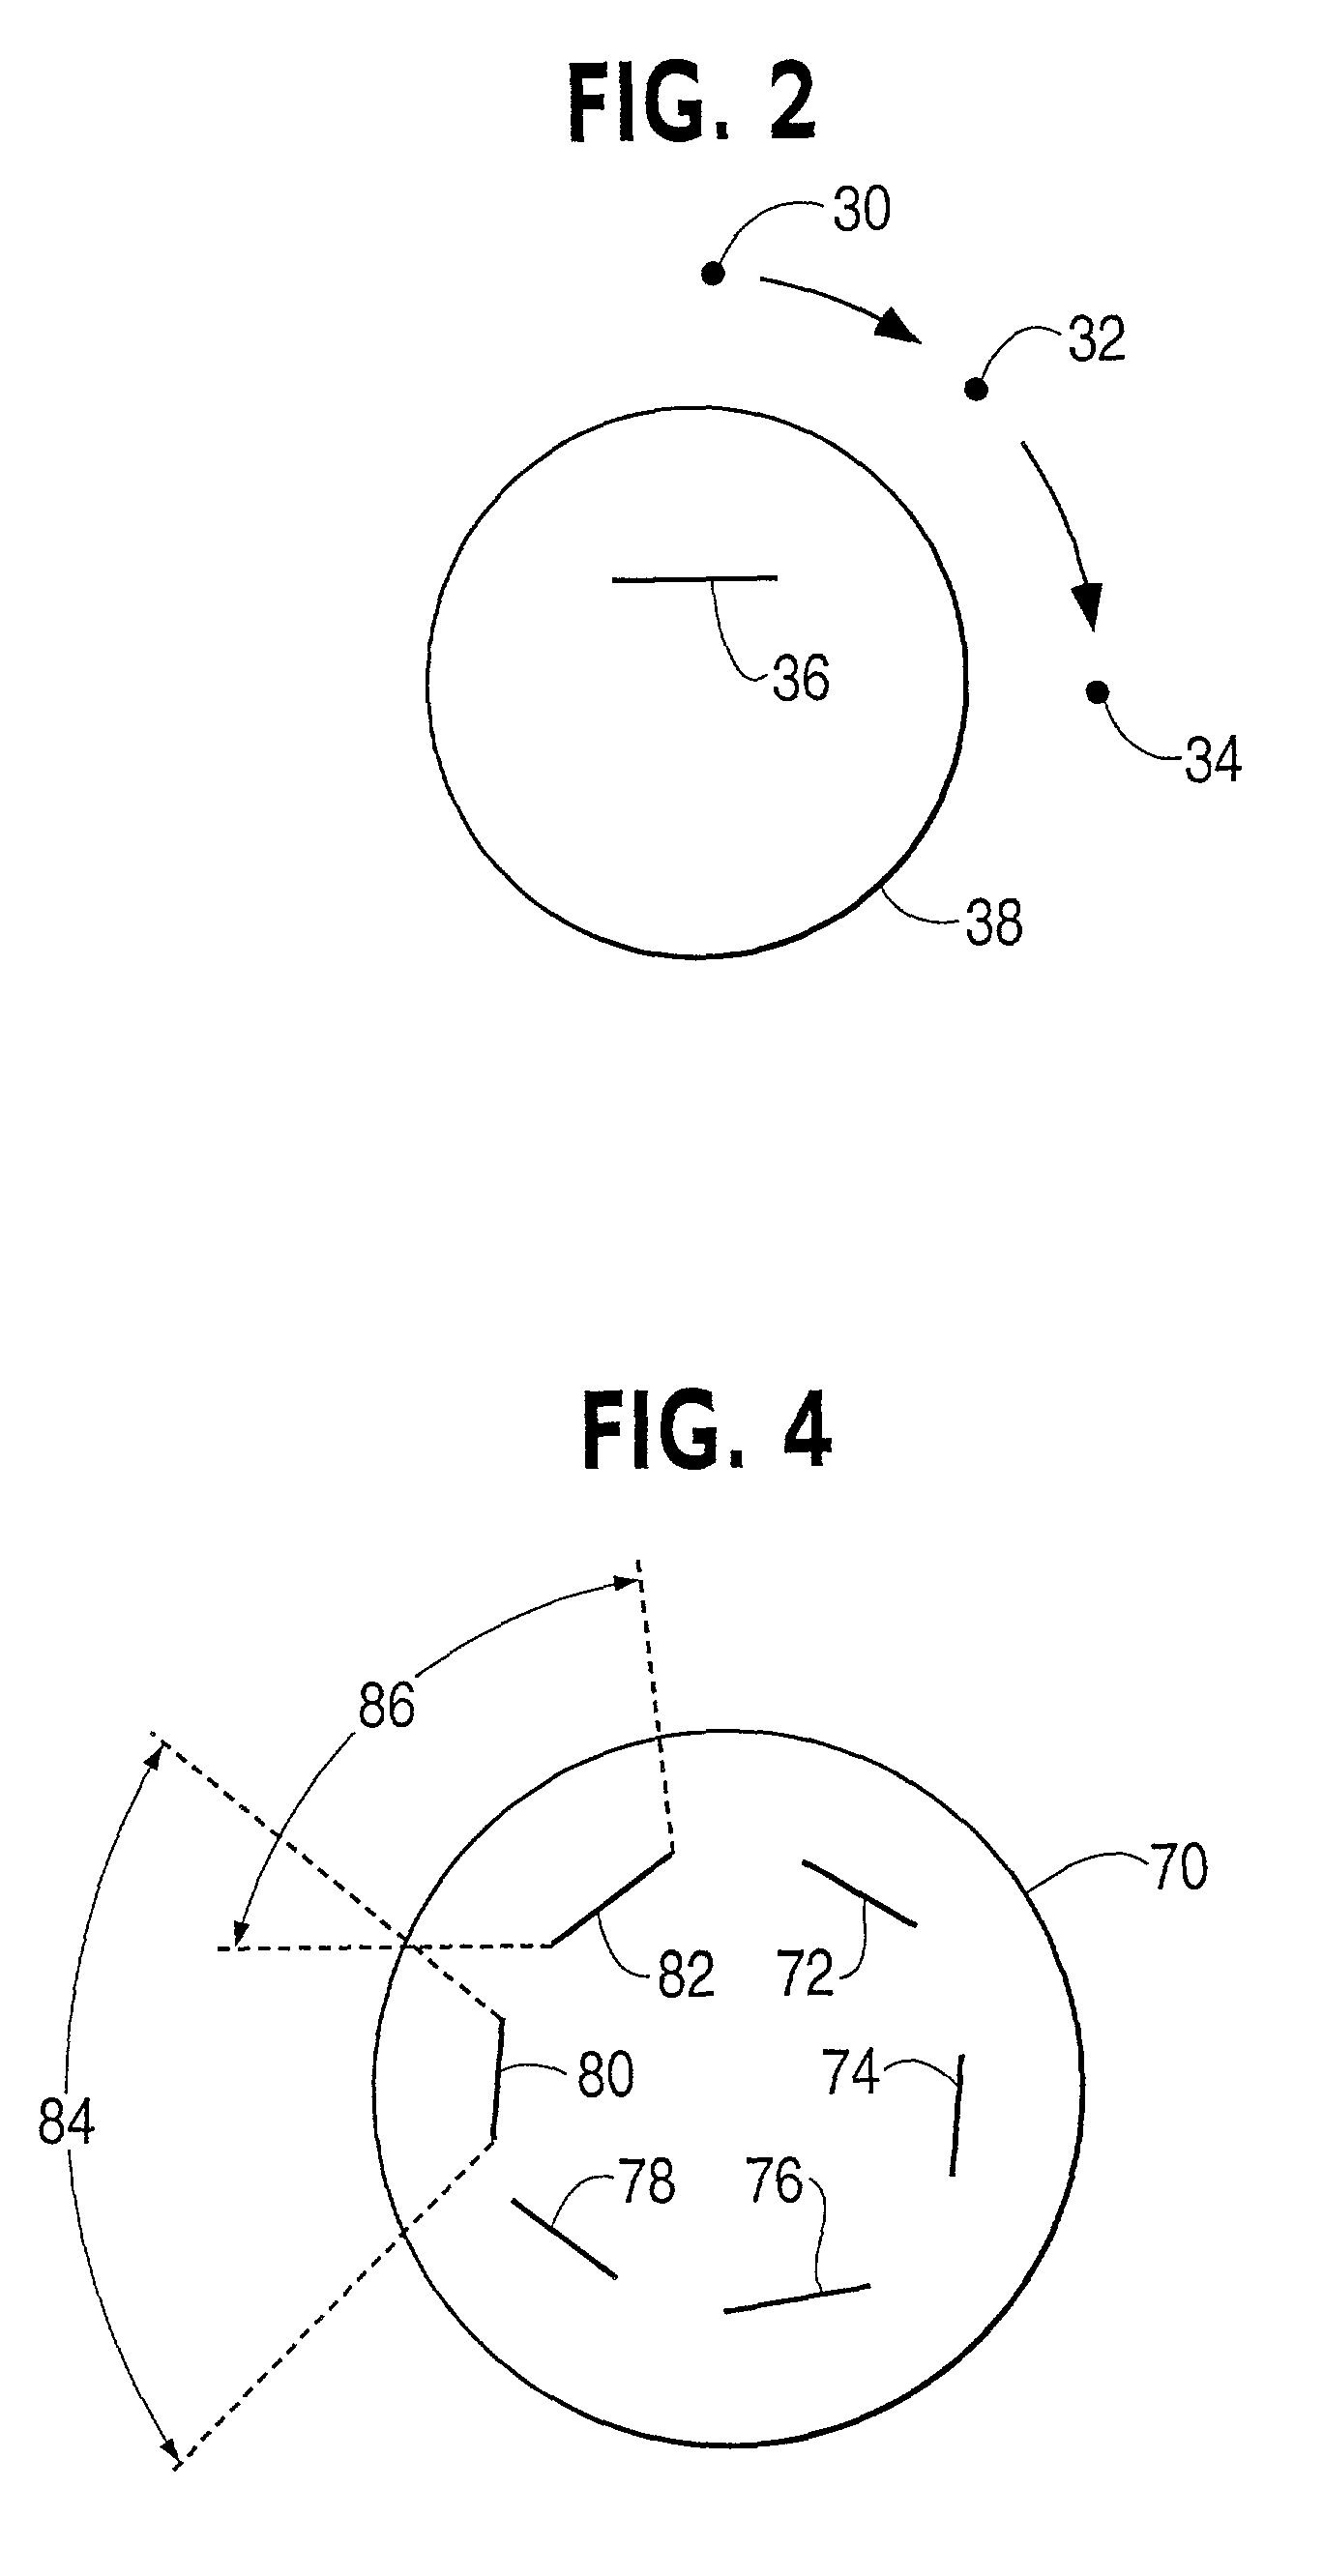 Graphical user interface widgets viewable and readable from multiple viewpoints in a volumetric display